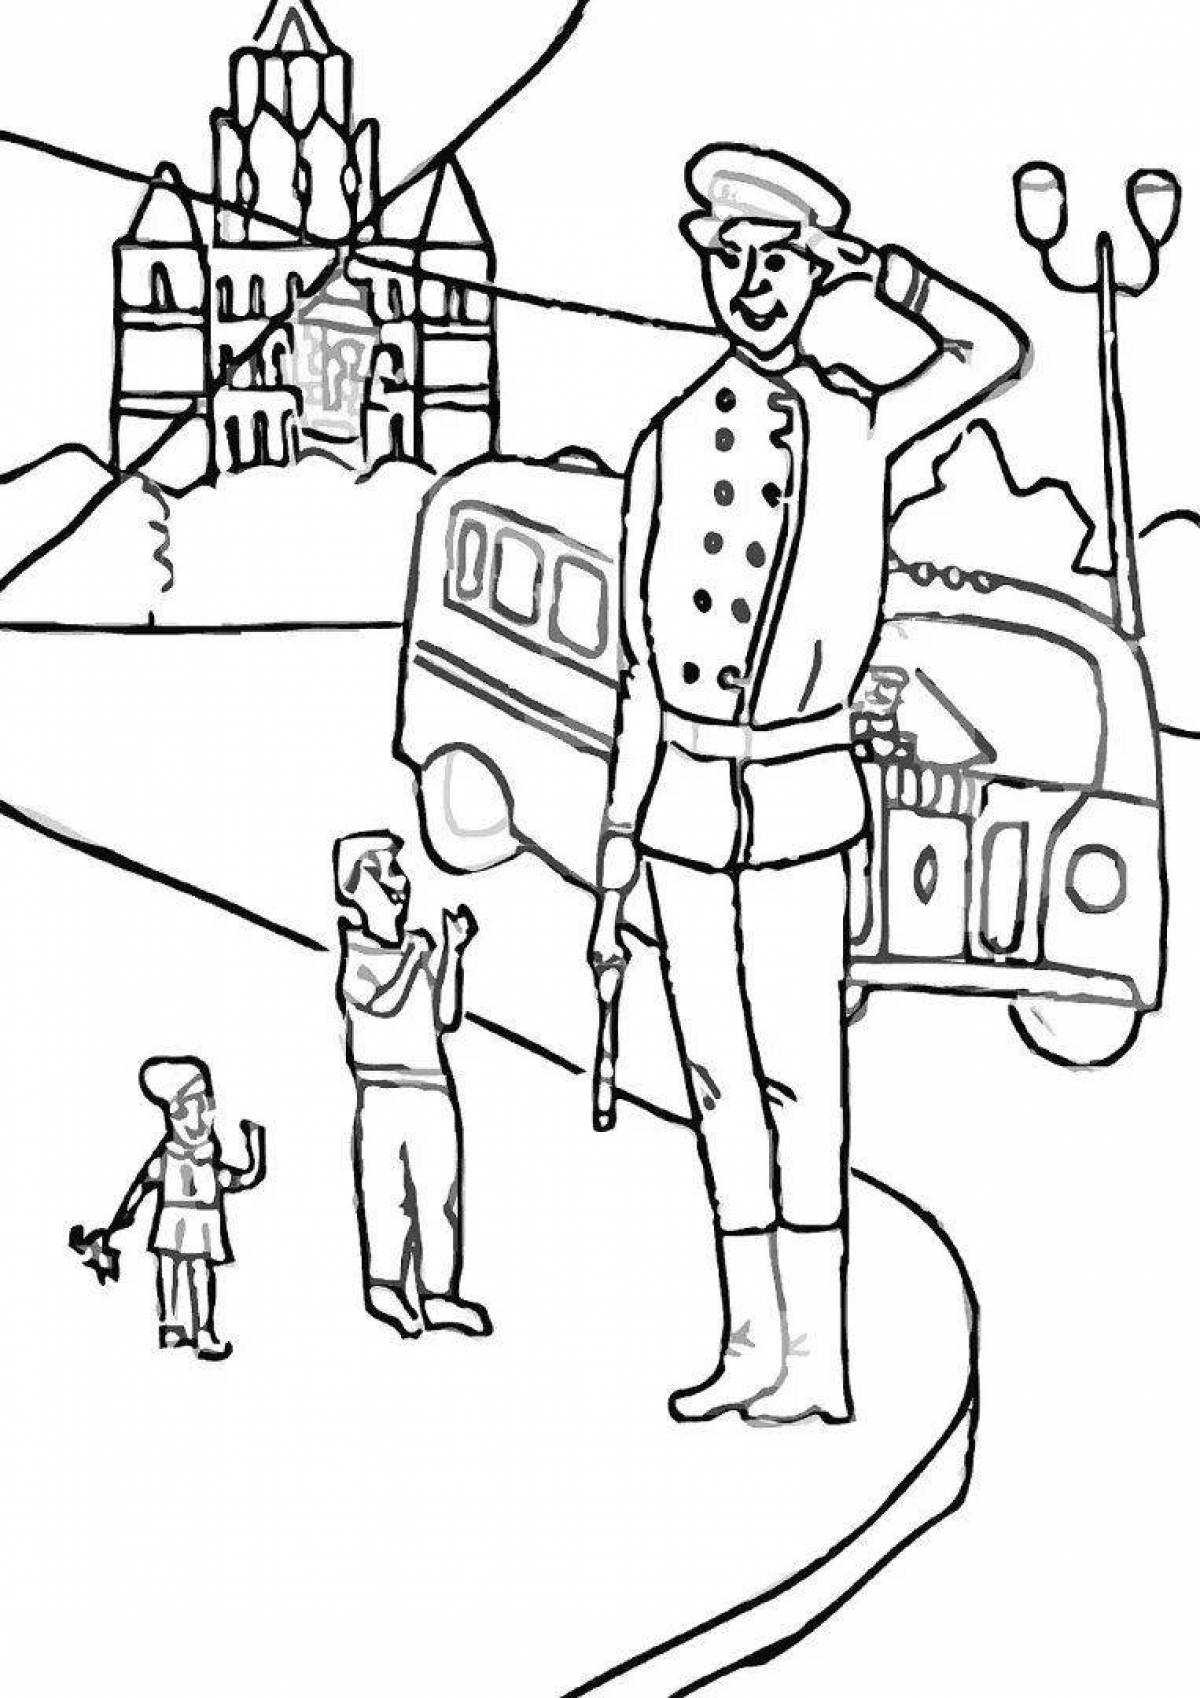 Charming Mikhalkov coloring book for children